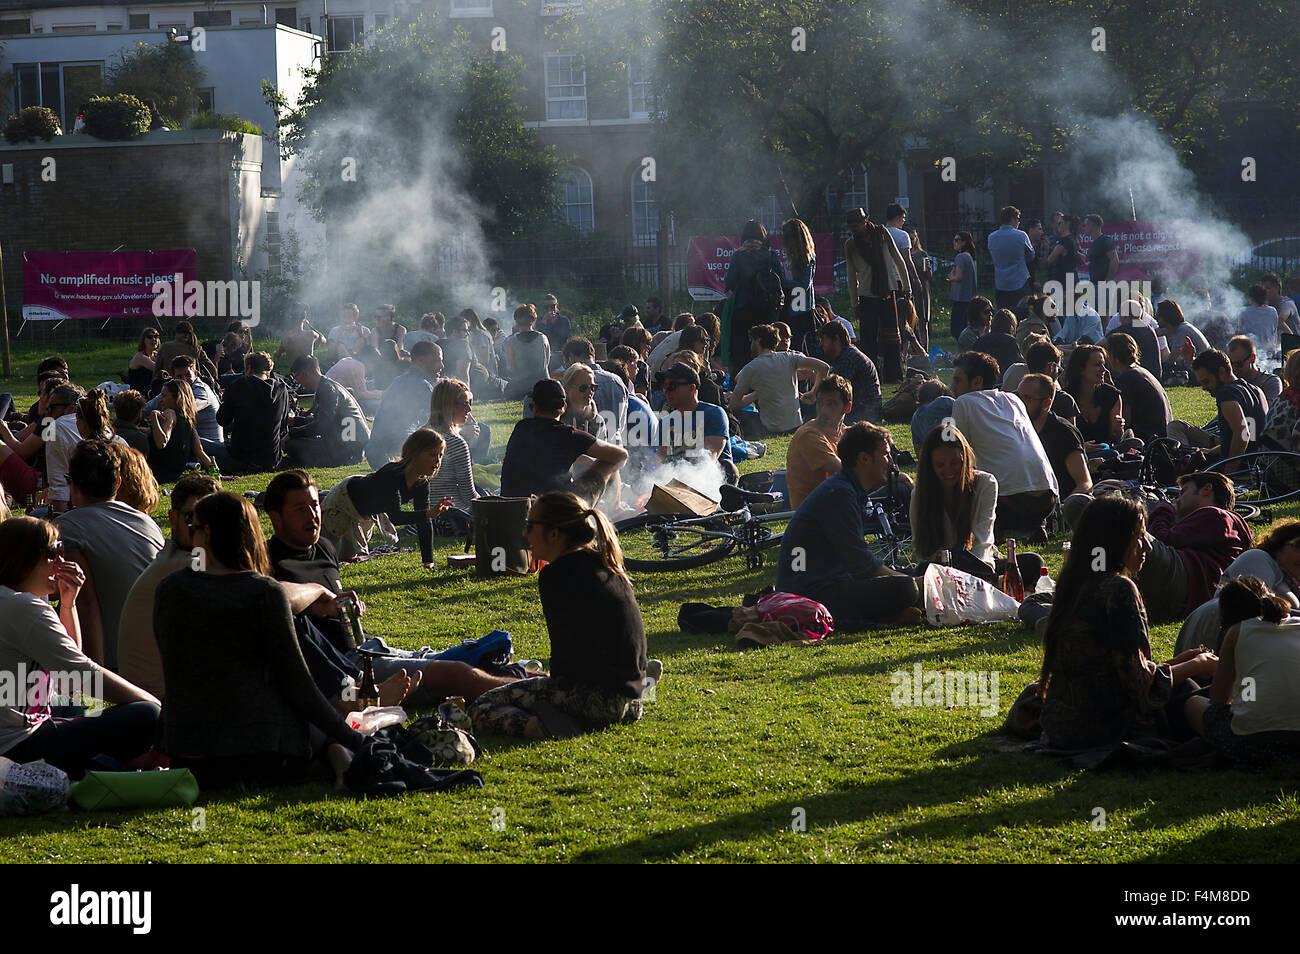 Large group of people in London Fields park on a sunny day, sitting on the grass, barbecuing, clouds of smoke rising Stock Photo